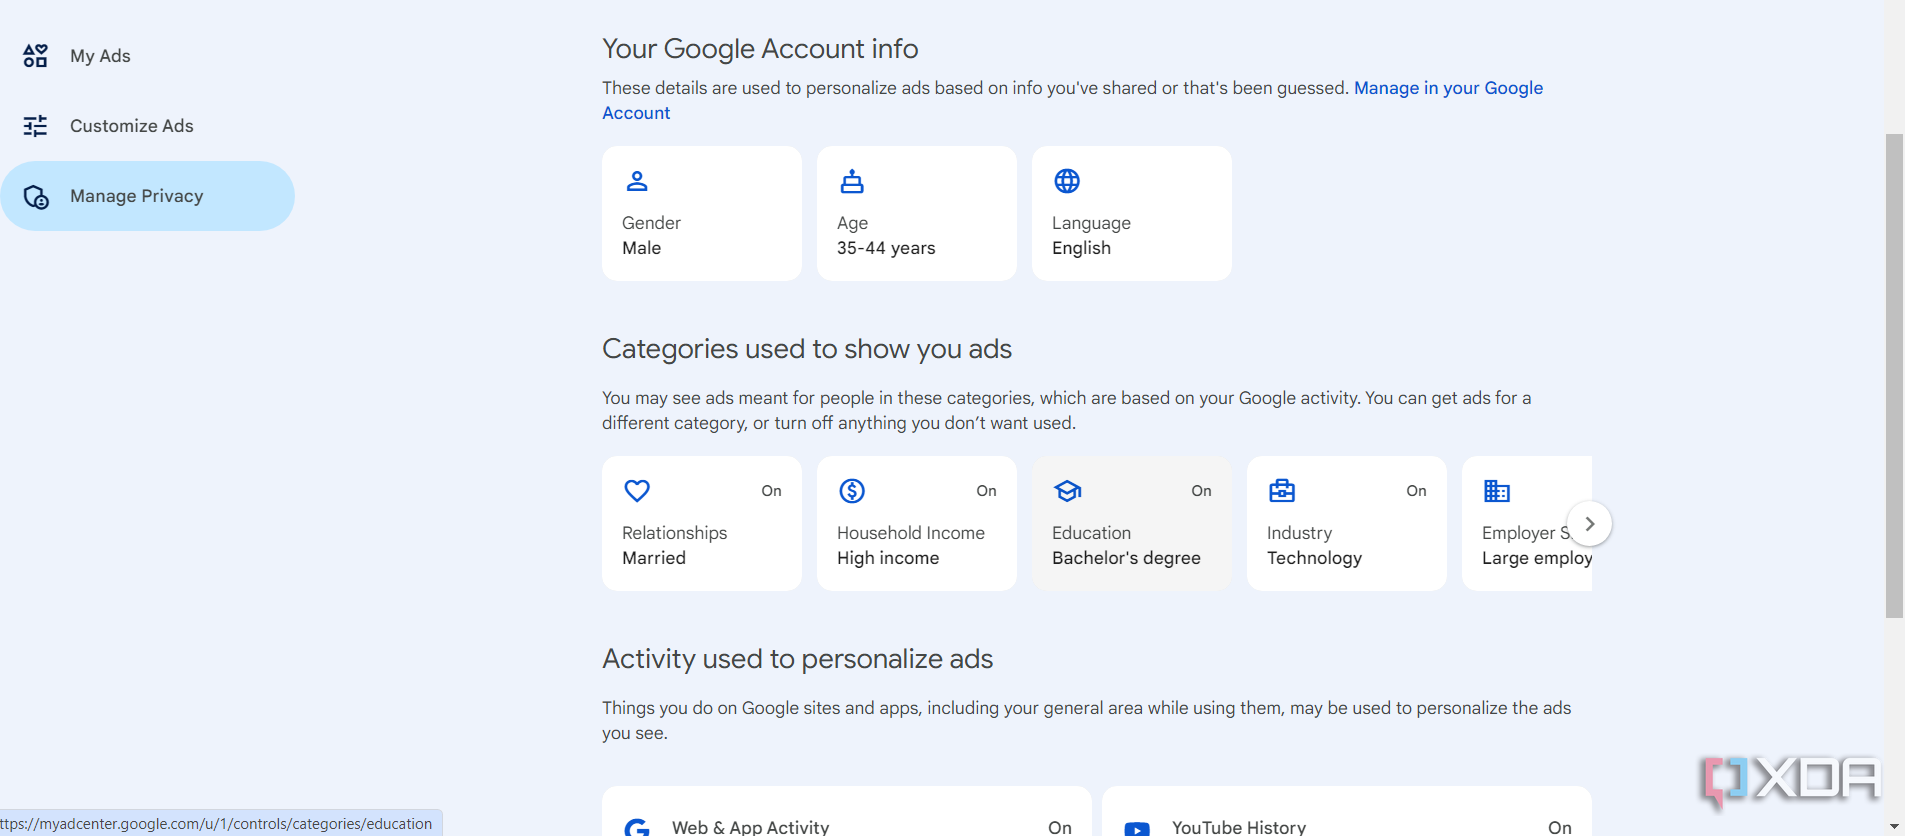 Google account page that shows how your ads are personalized.